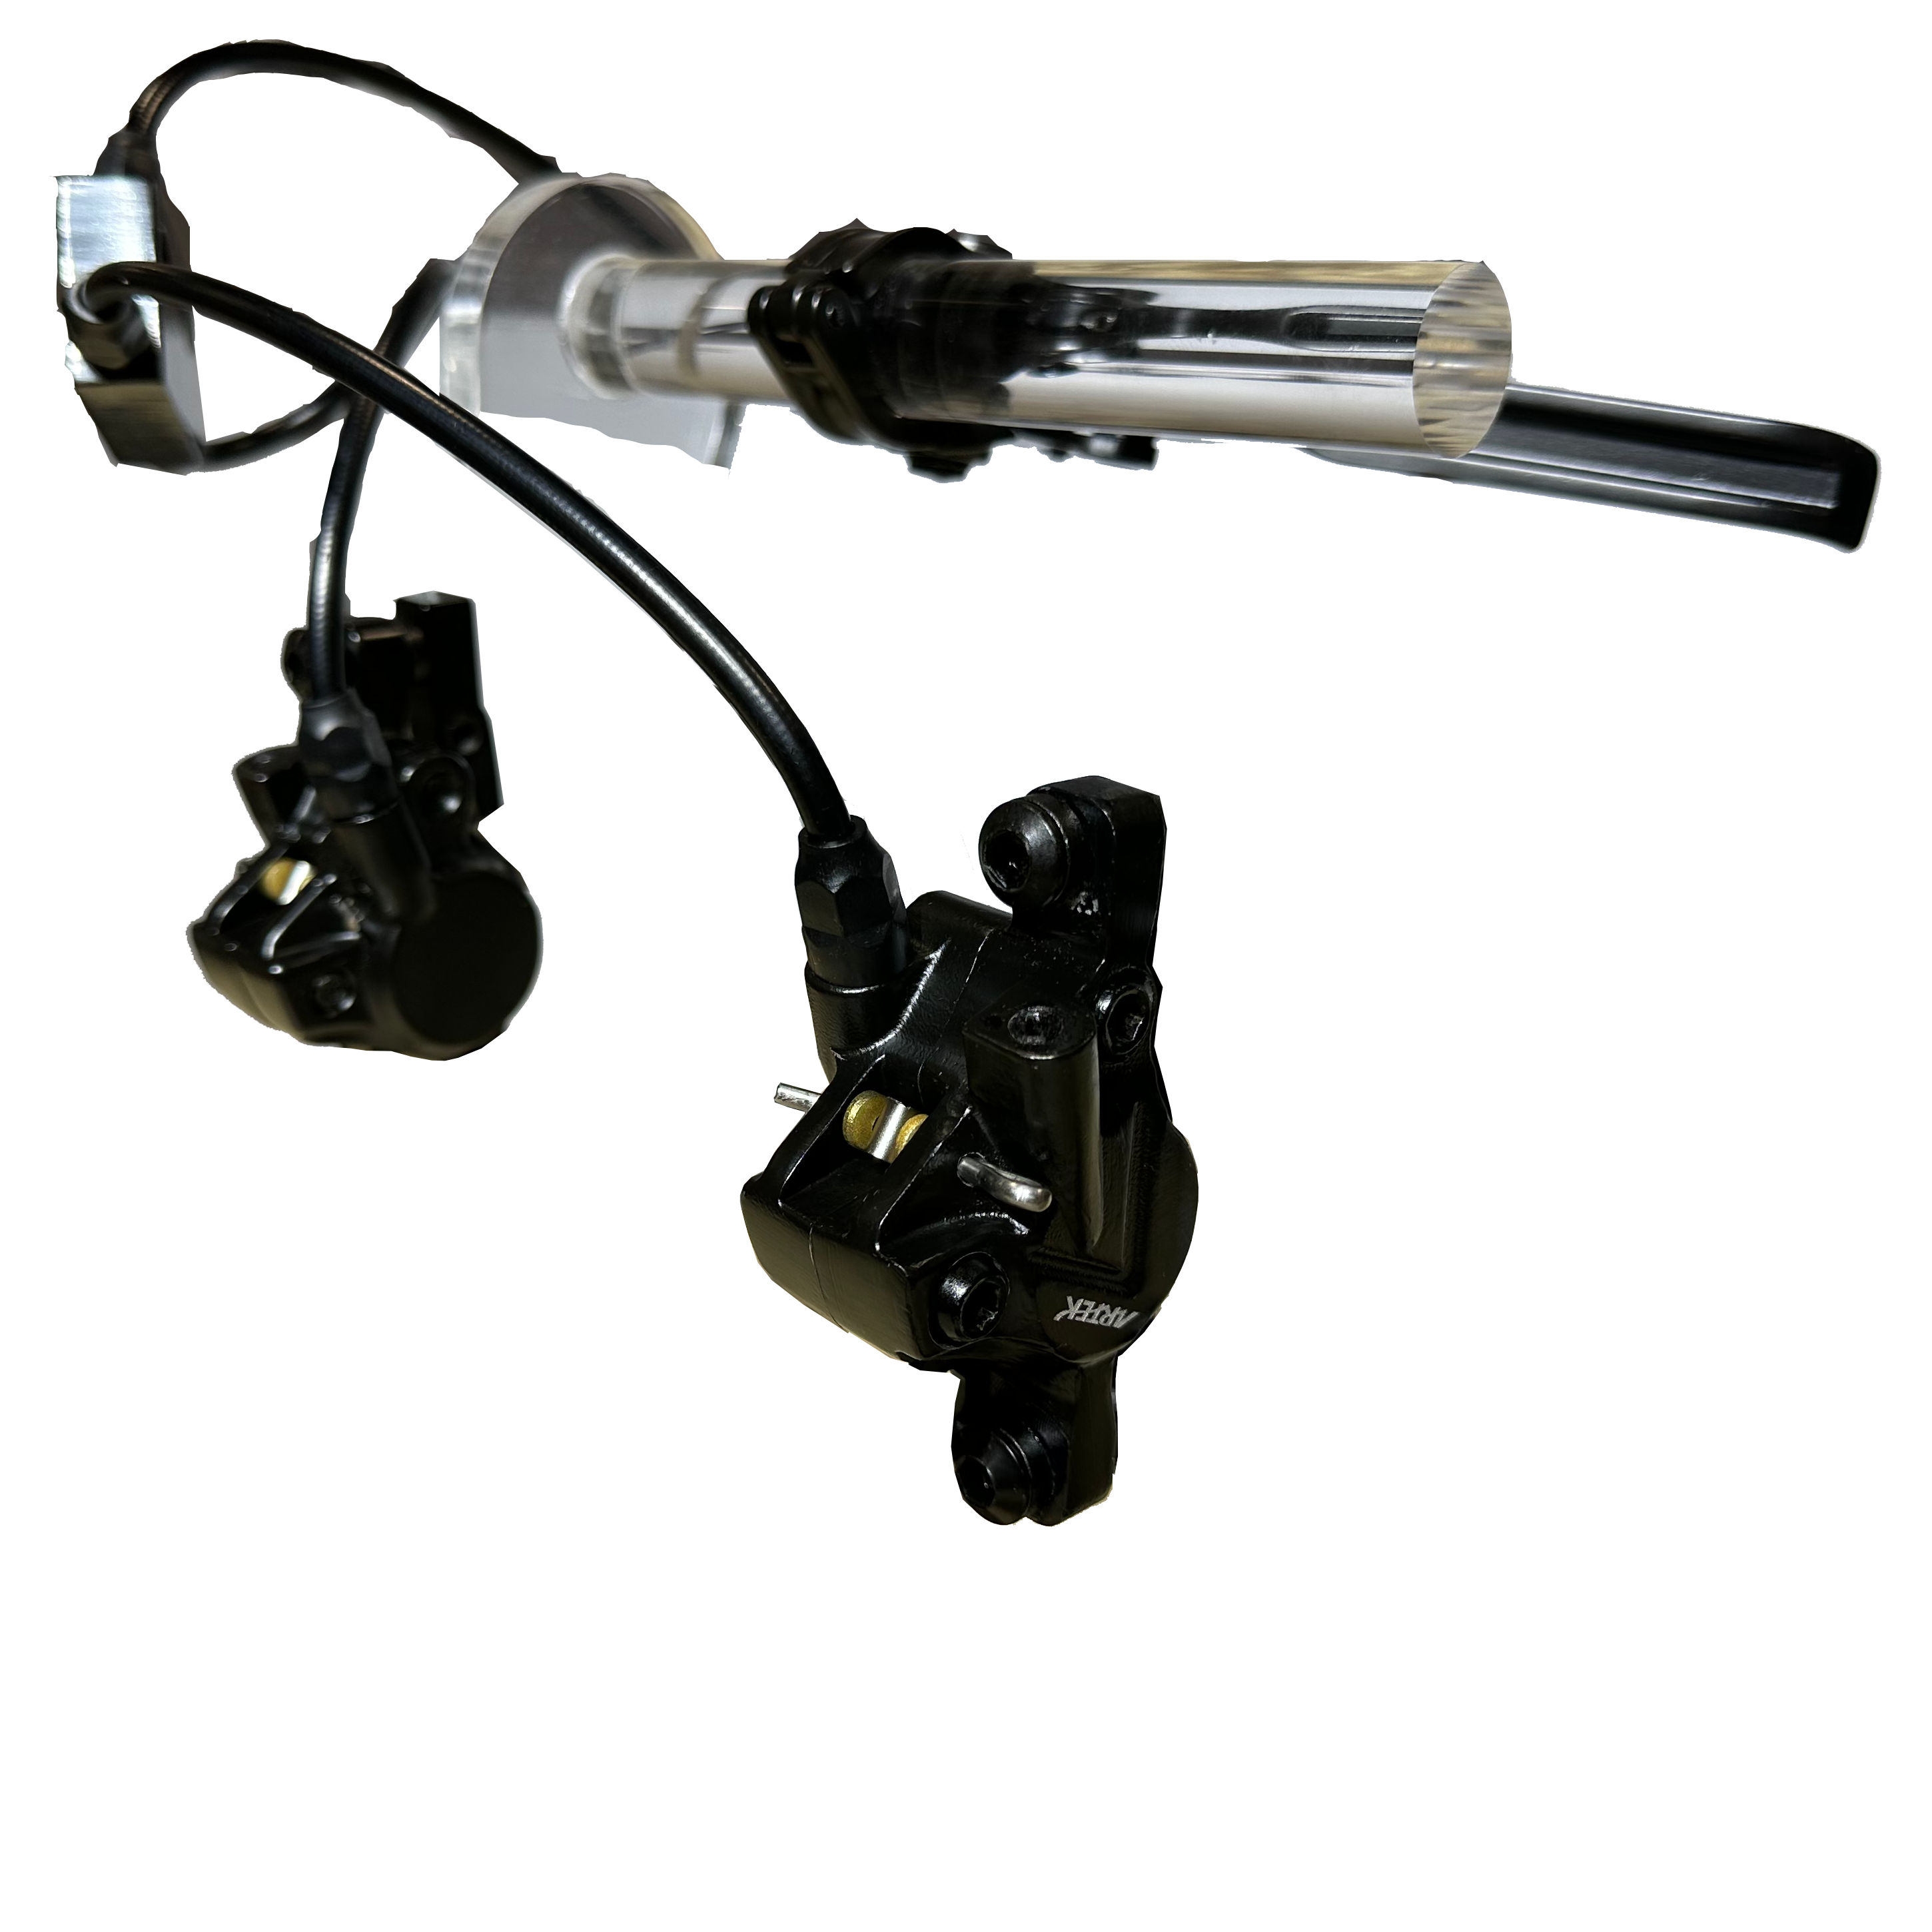 DB-HT214RG Trike Hydraulic Disk Brake Set with Dual Mirrored 2-Piston Calipers and Lock Pin